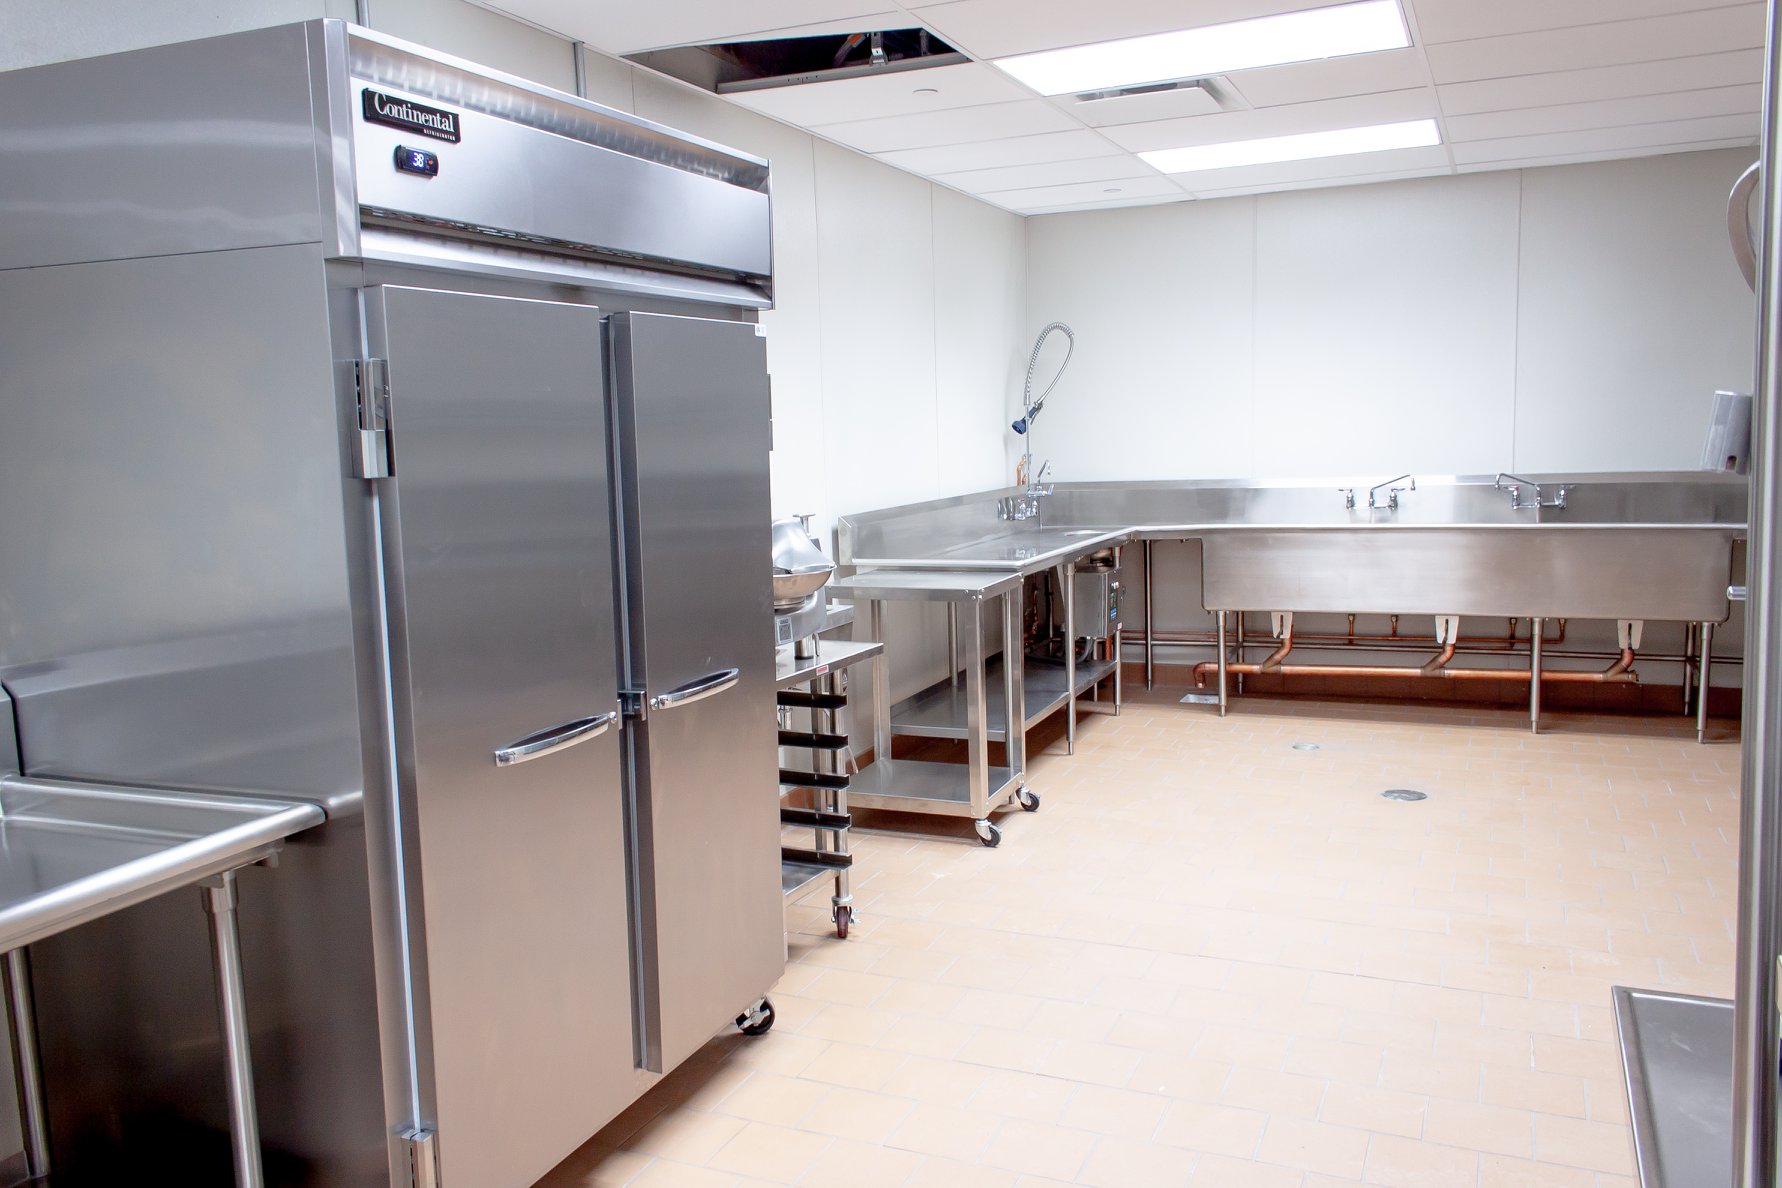 Continental Refrigerator. Innovative Designs for your FoodService Needs